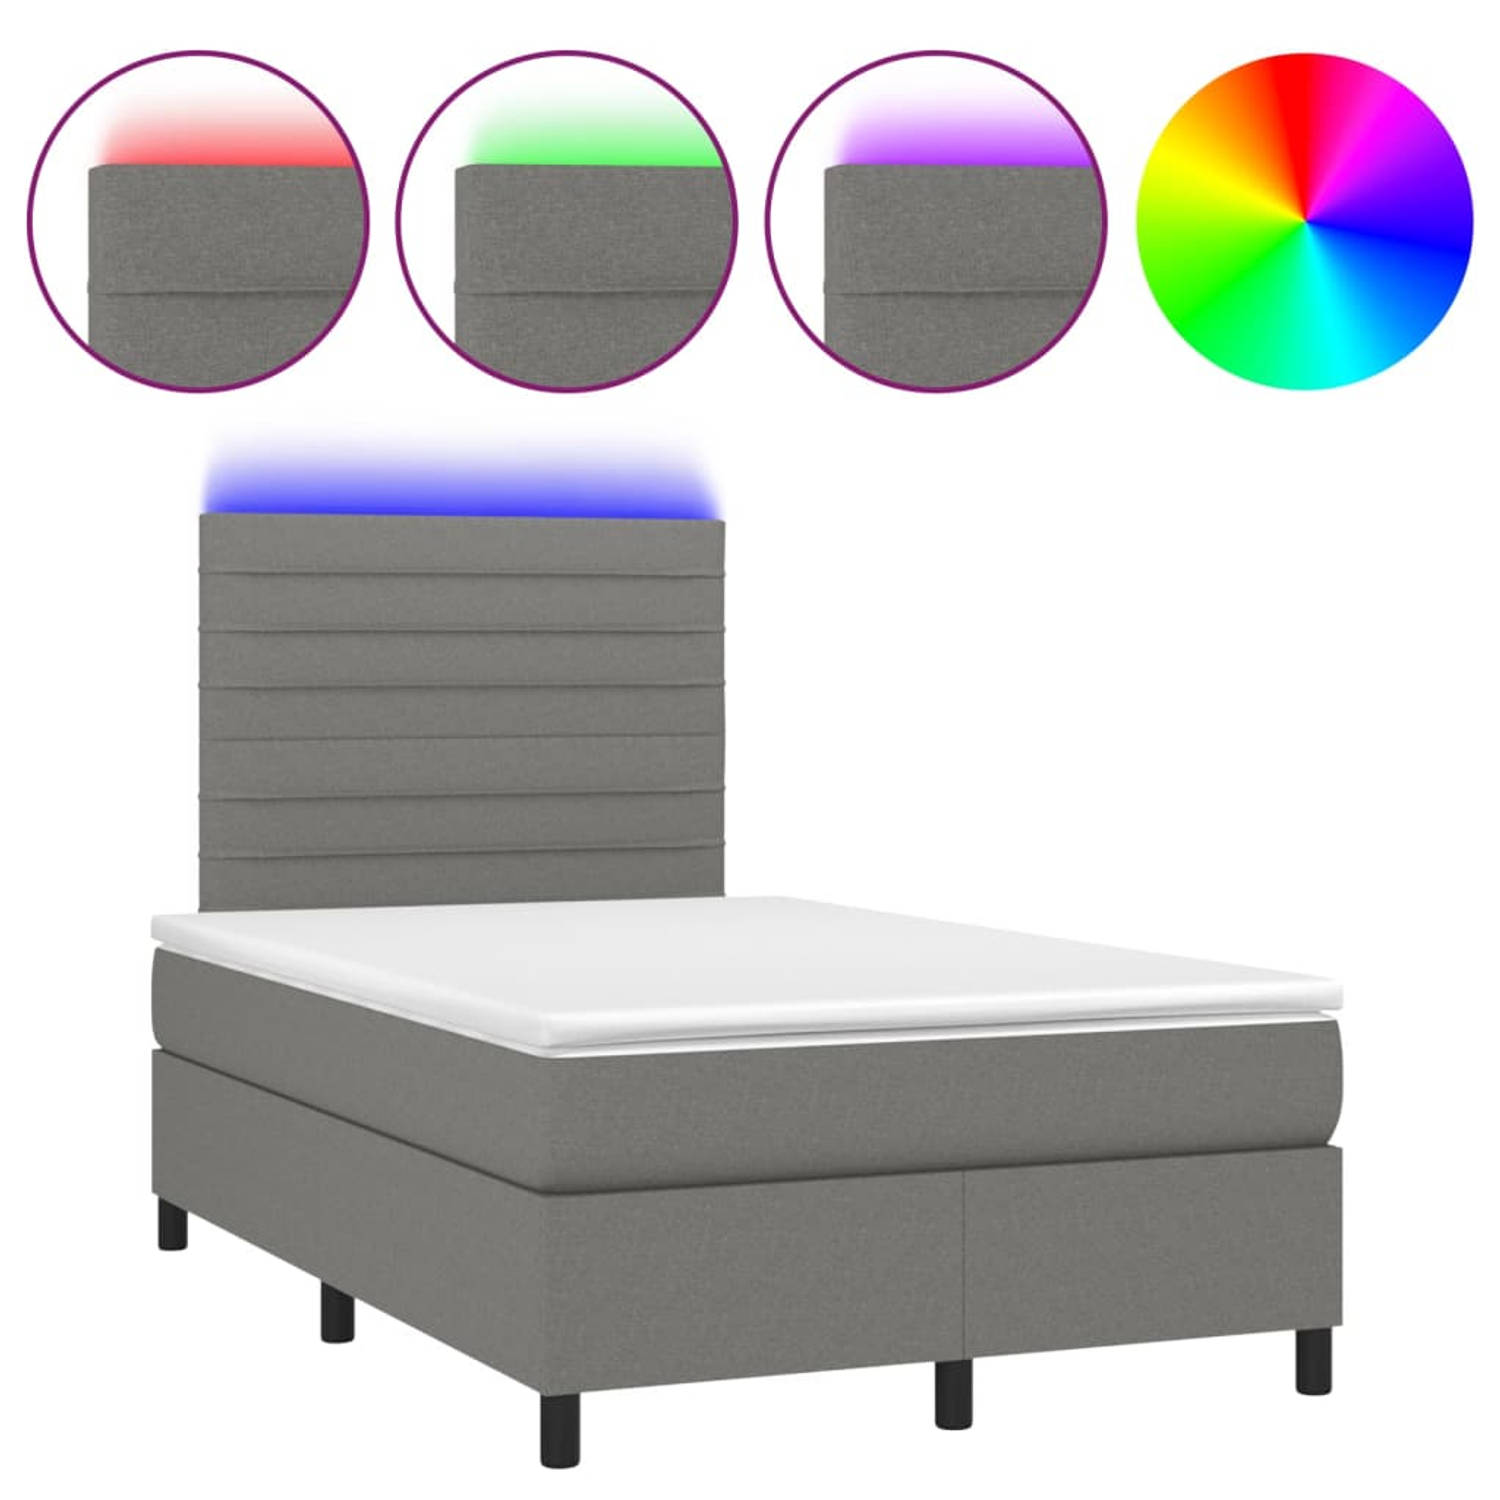 The Living Store Boxspring Bed - Donkergrijs - 203 x 120 x 118/128 cm - LED-verlichting